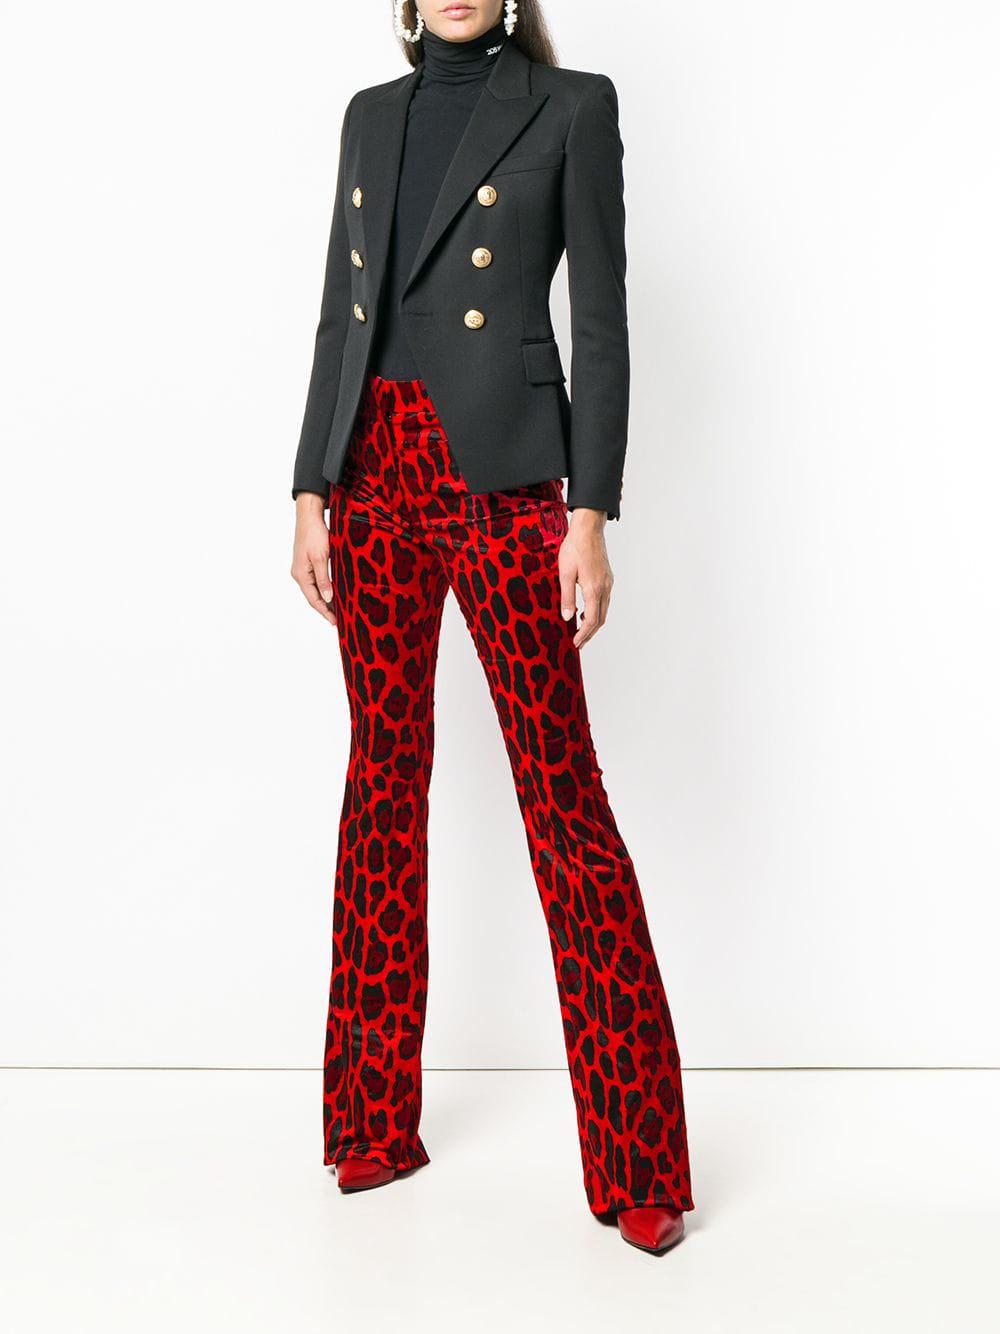 Tom Ford Cheetah Printed Trousers in Red